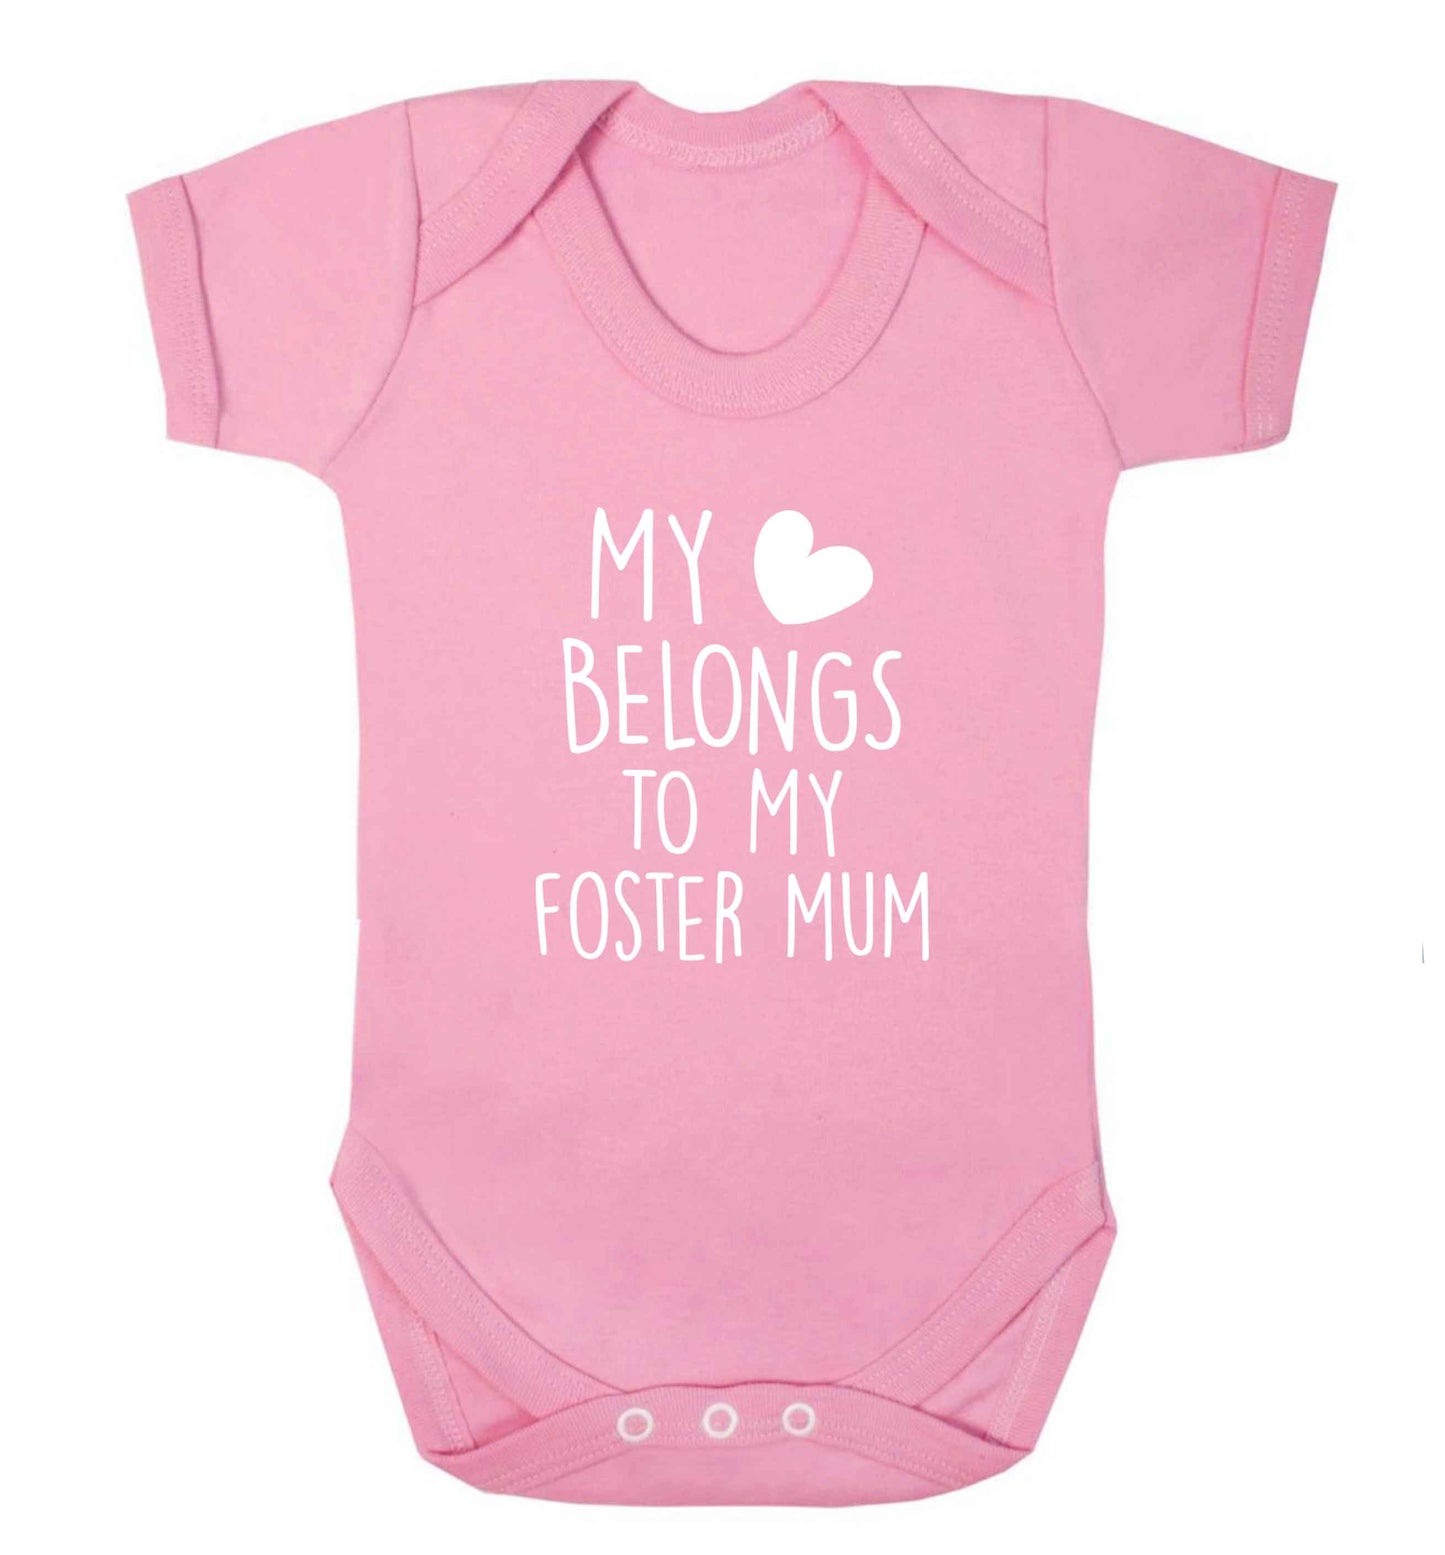 My heart belongs to my foster mum baby vest pale pink 18-24 months